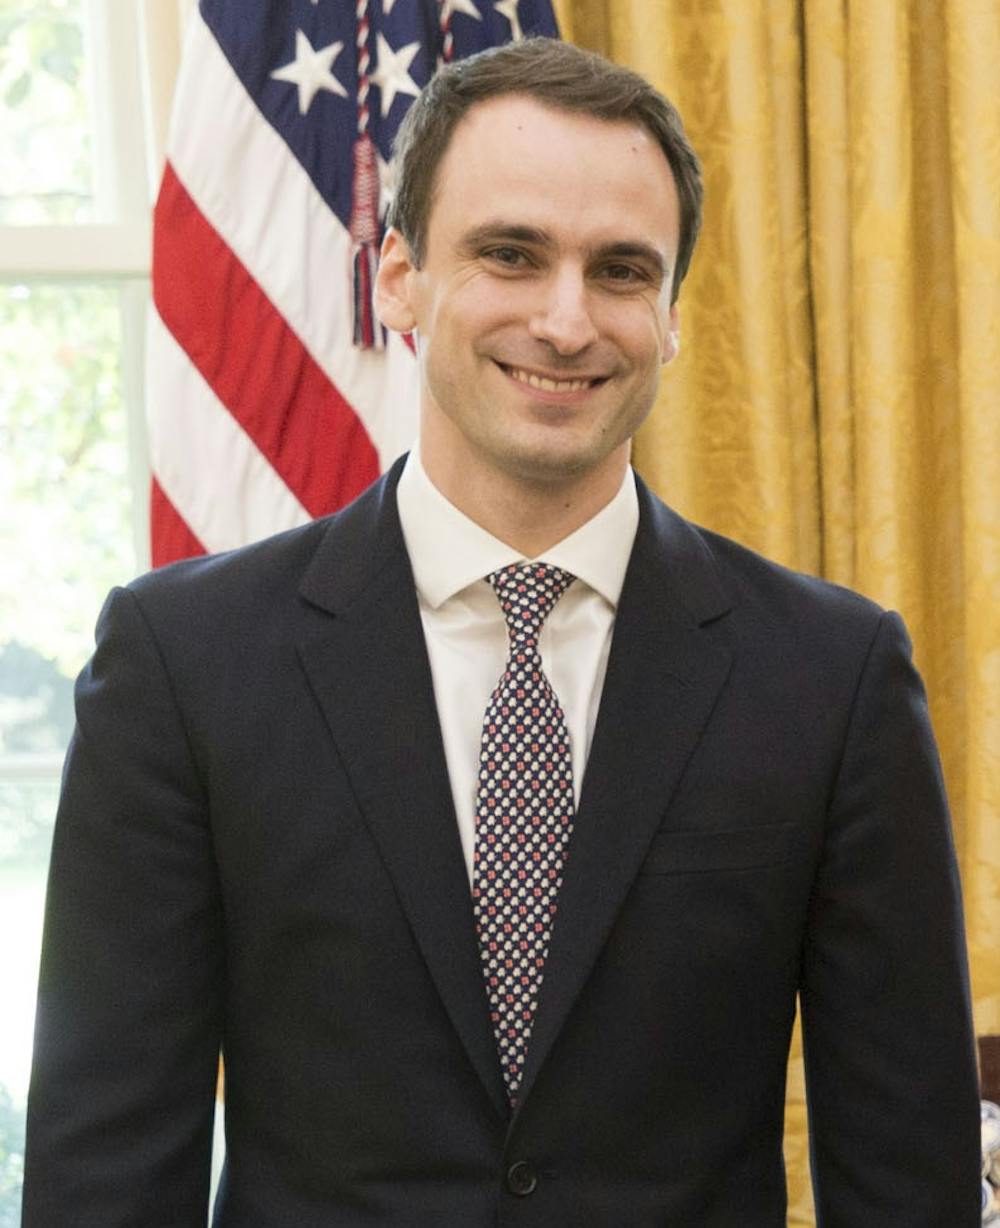 <p>Photo Caption: Michael Kratsios majored in Politics during his time at the University.</p>
<p>Photo Credit: Shealah Craighead / The White House</p>